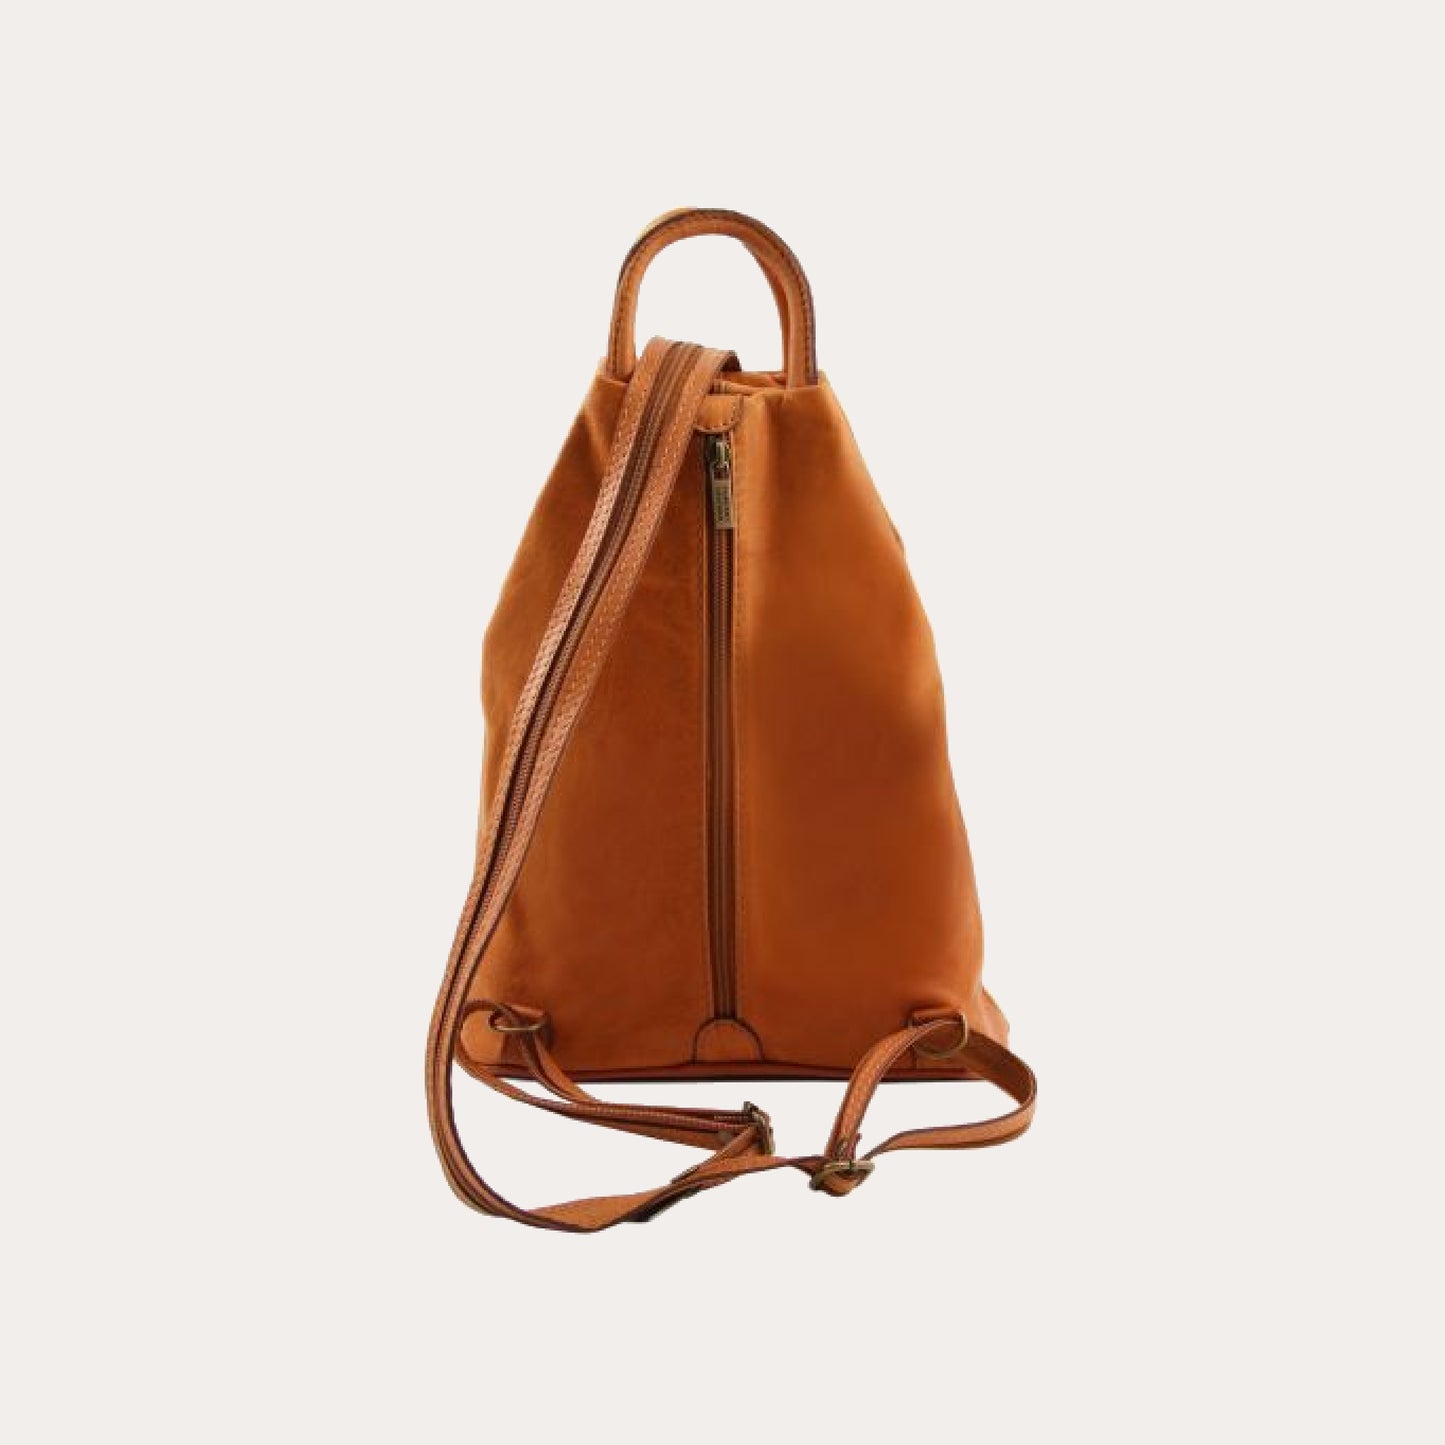 Tuscany Leather Cognac Leather Backpack